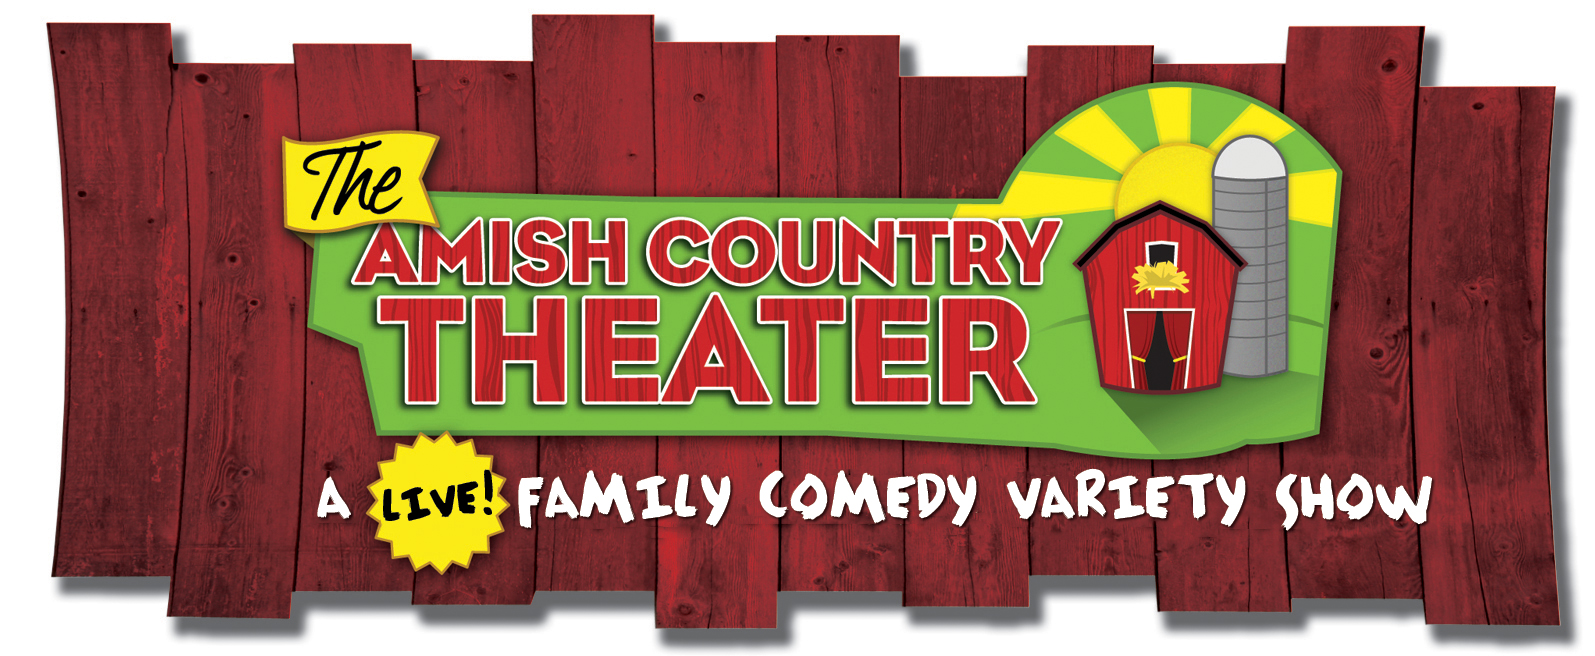 the Amish Country Theater in Walnut Creek, ohio